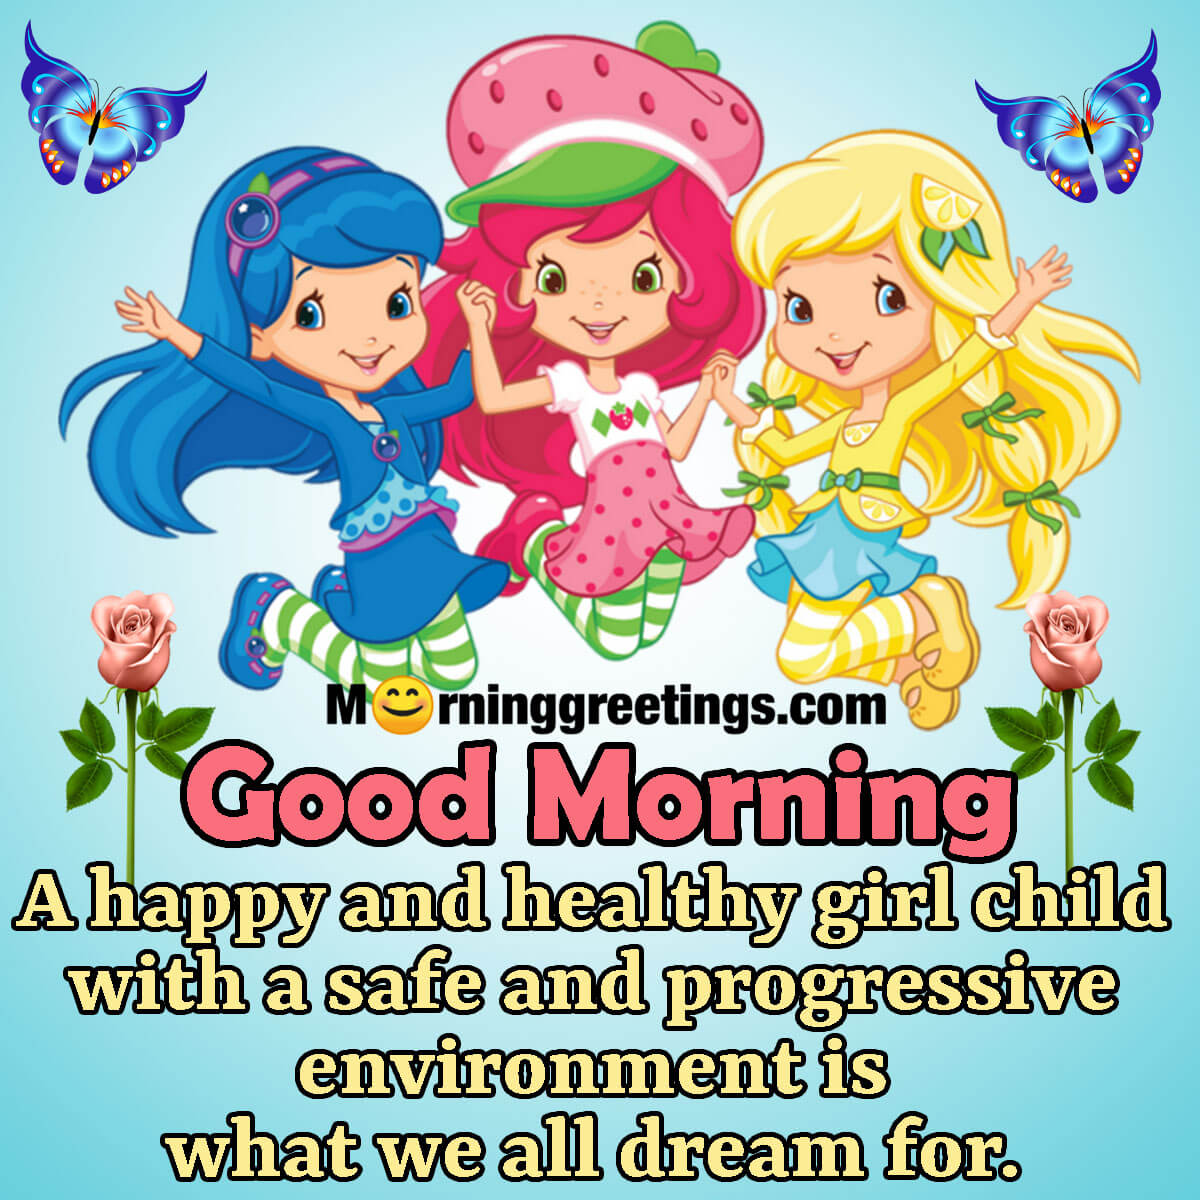 Good Morning Happy And Healthy Girl Child